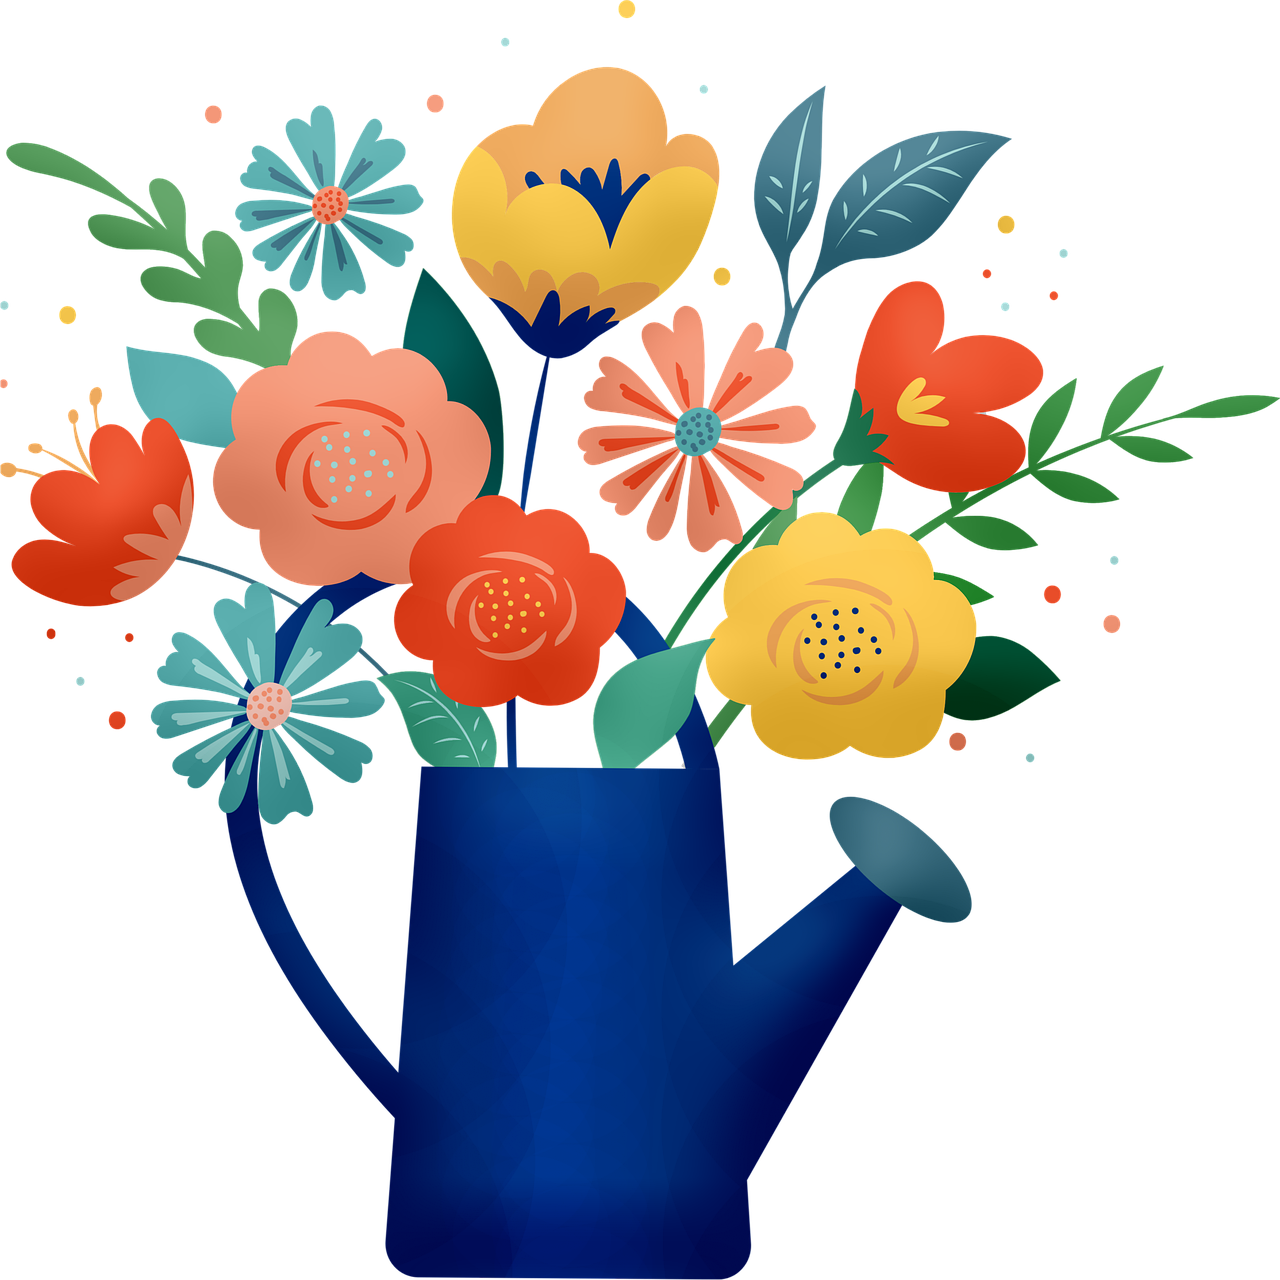 a blue watering can filled with colorful flowers, by Lena Alexander, pixabay, conceptual art, flat illustration, dark. no text, floating bouquets, avatar image